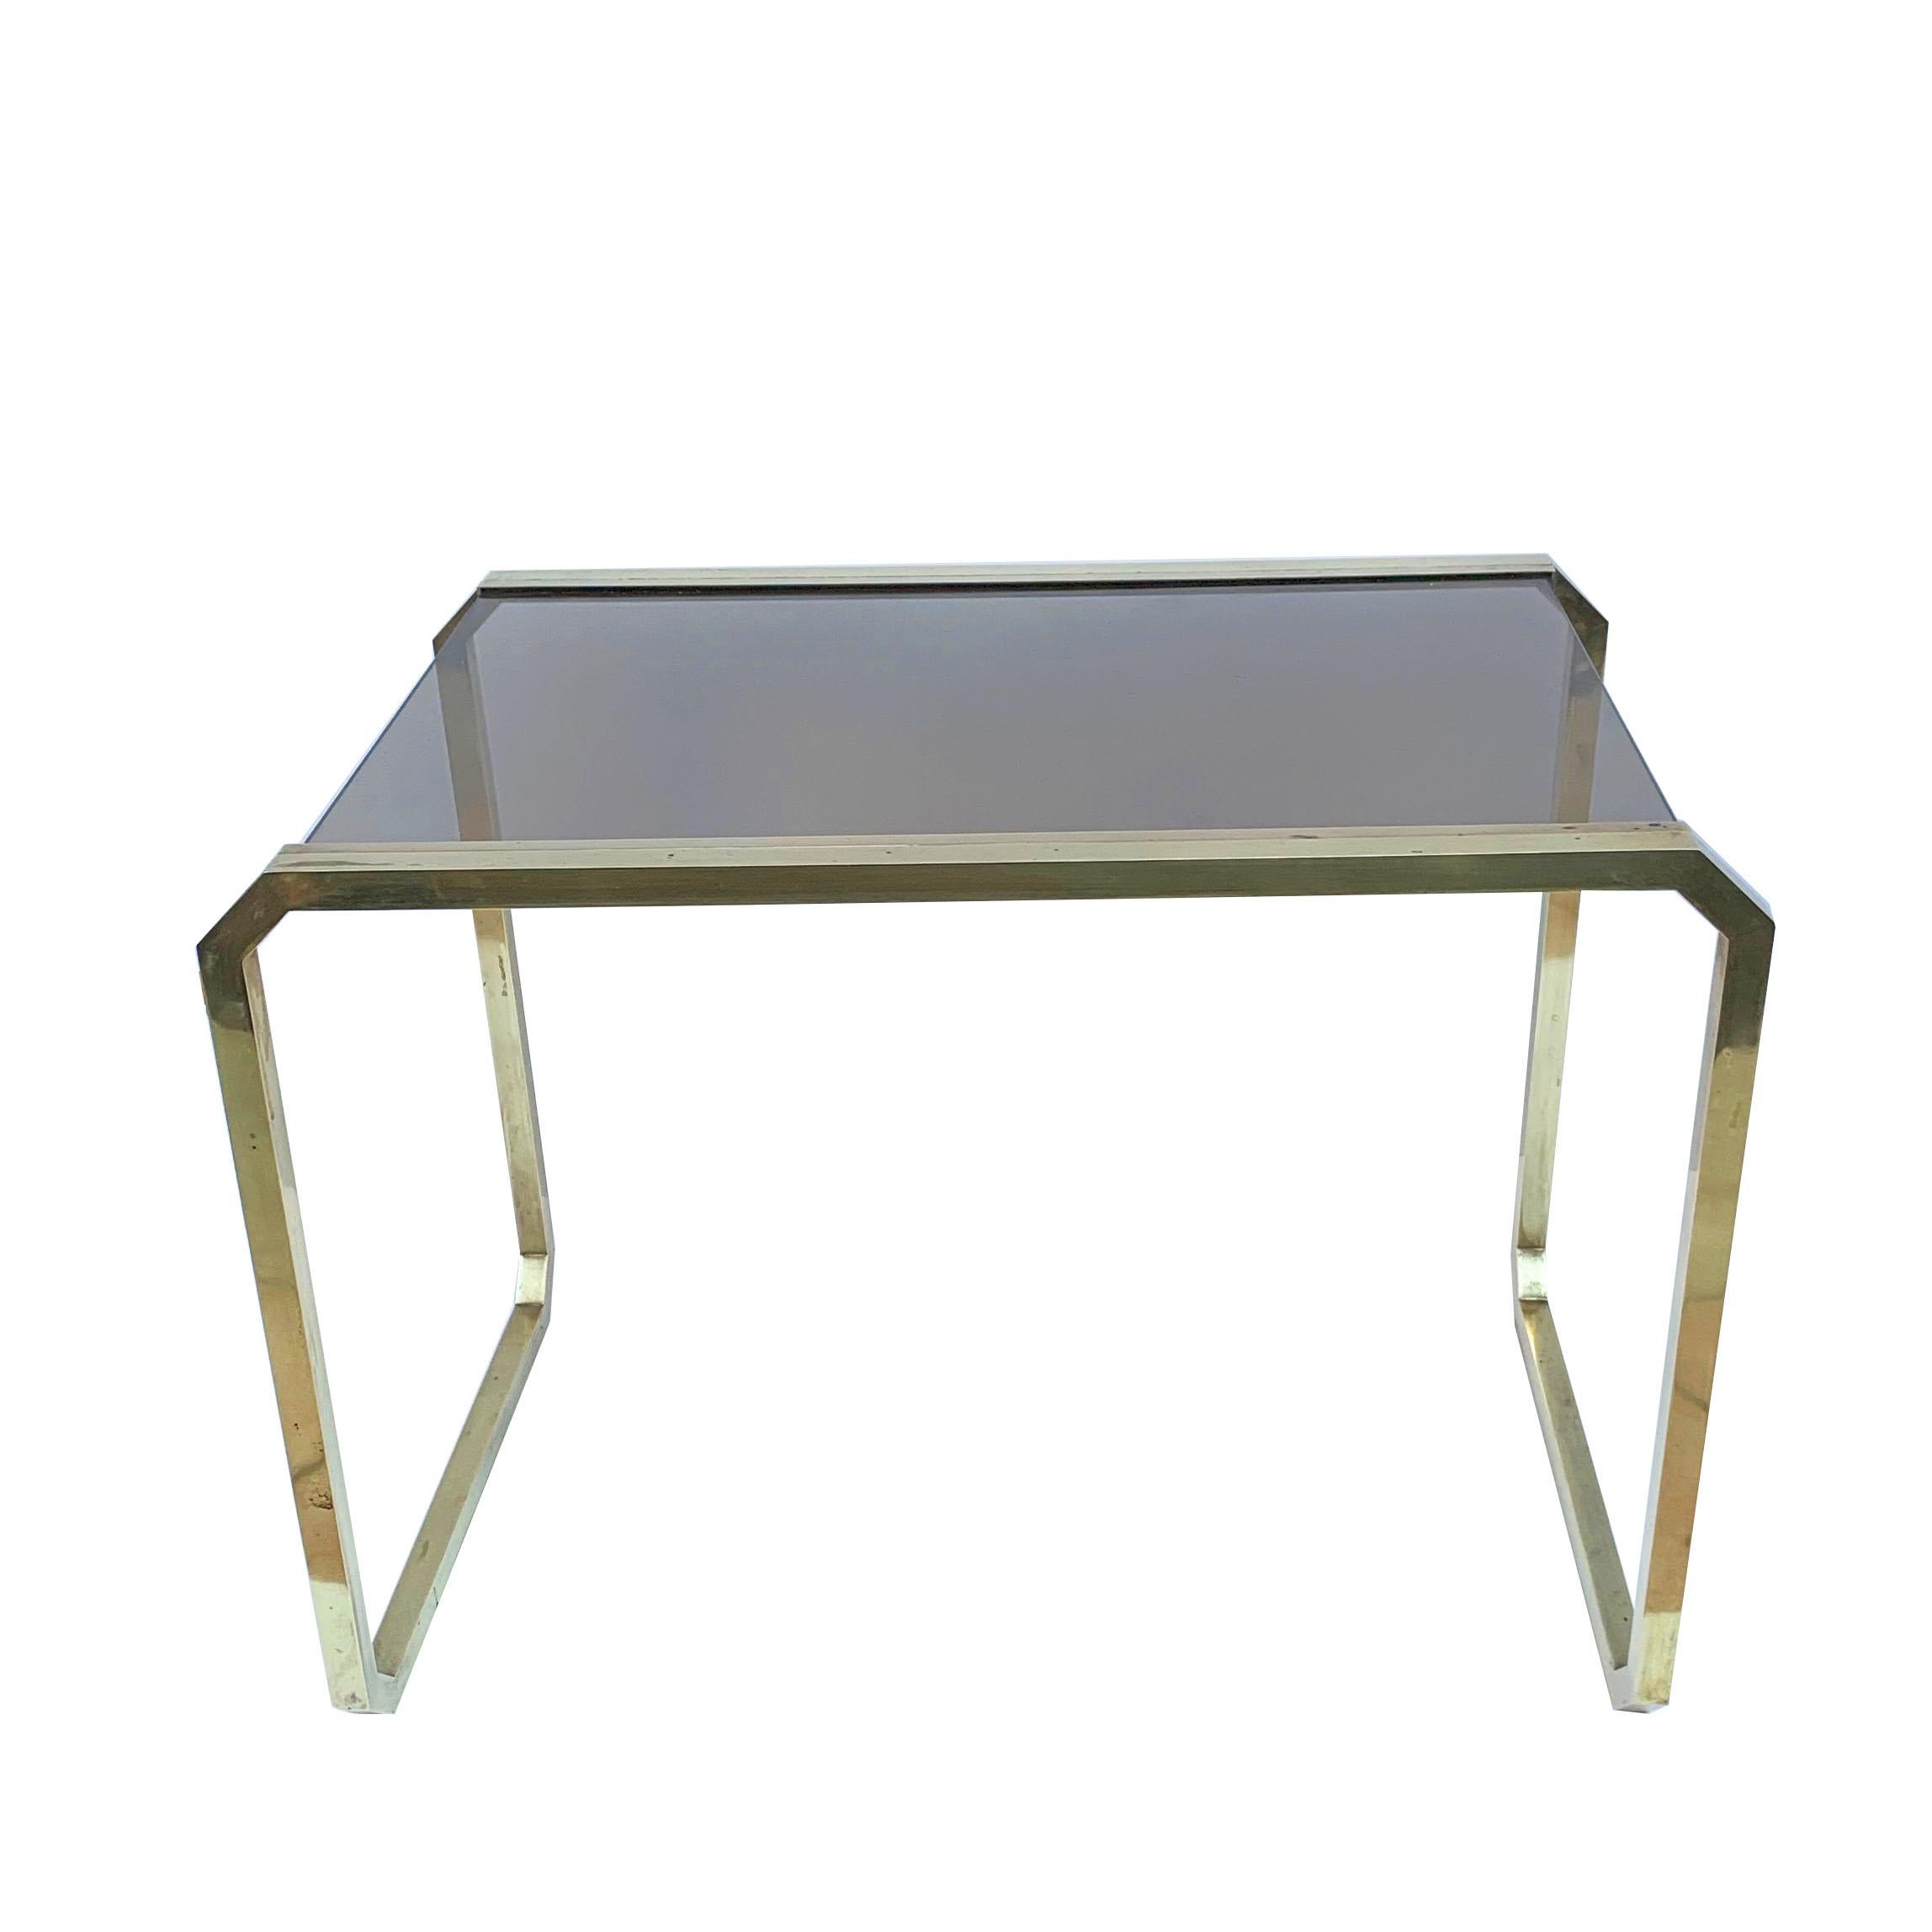 Mid-Century Modern Romeo Rega style Coffee Table in Brass and Smoked Glass, Italy, 1970s Midcentury For Sale